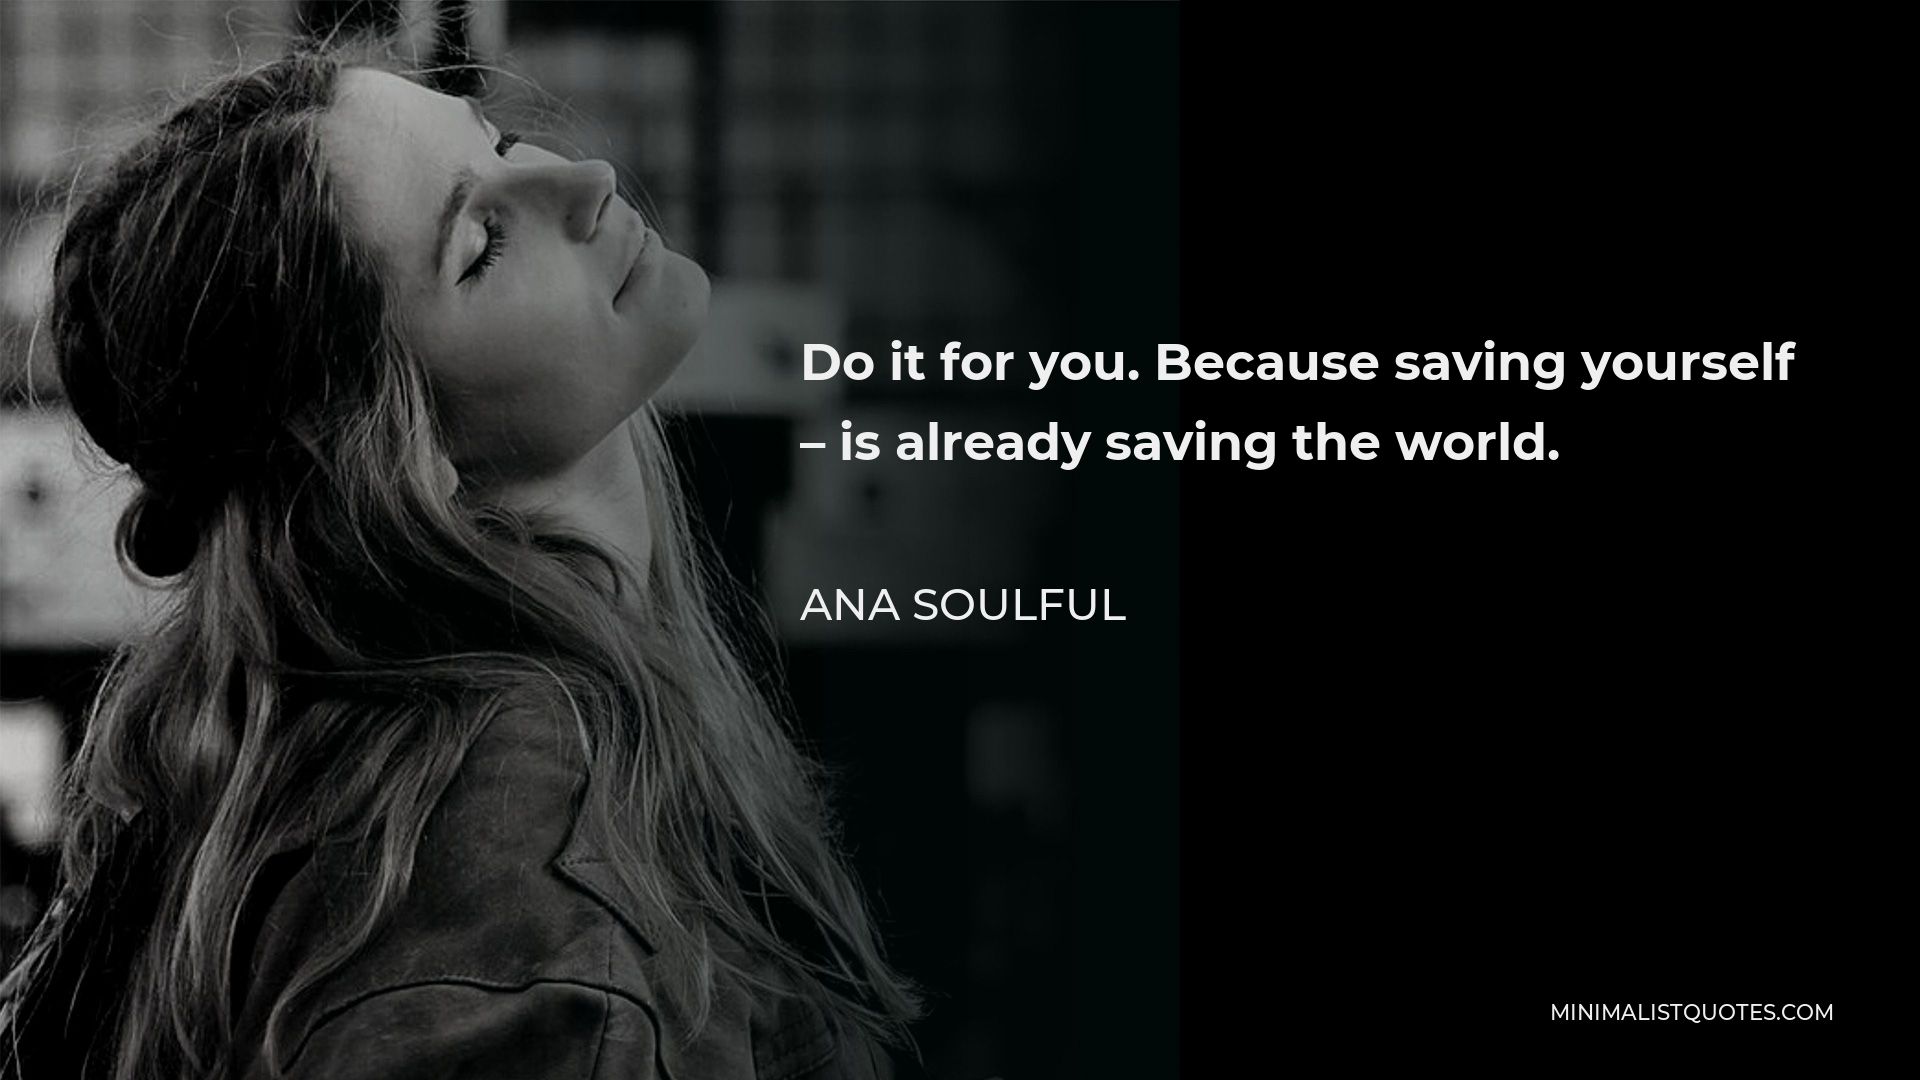 Ana Soulful Quote - Do it for you. Because saving yourself – is already saving the world.